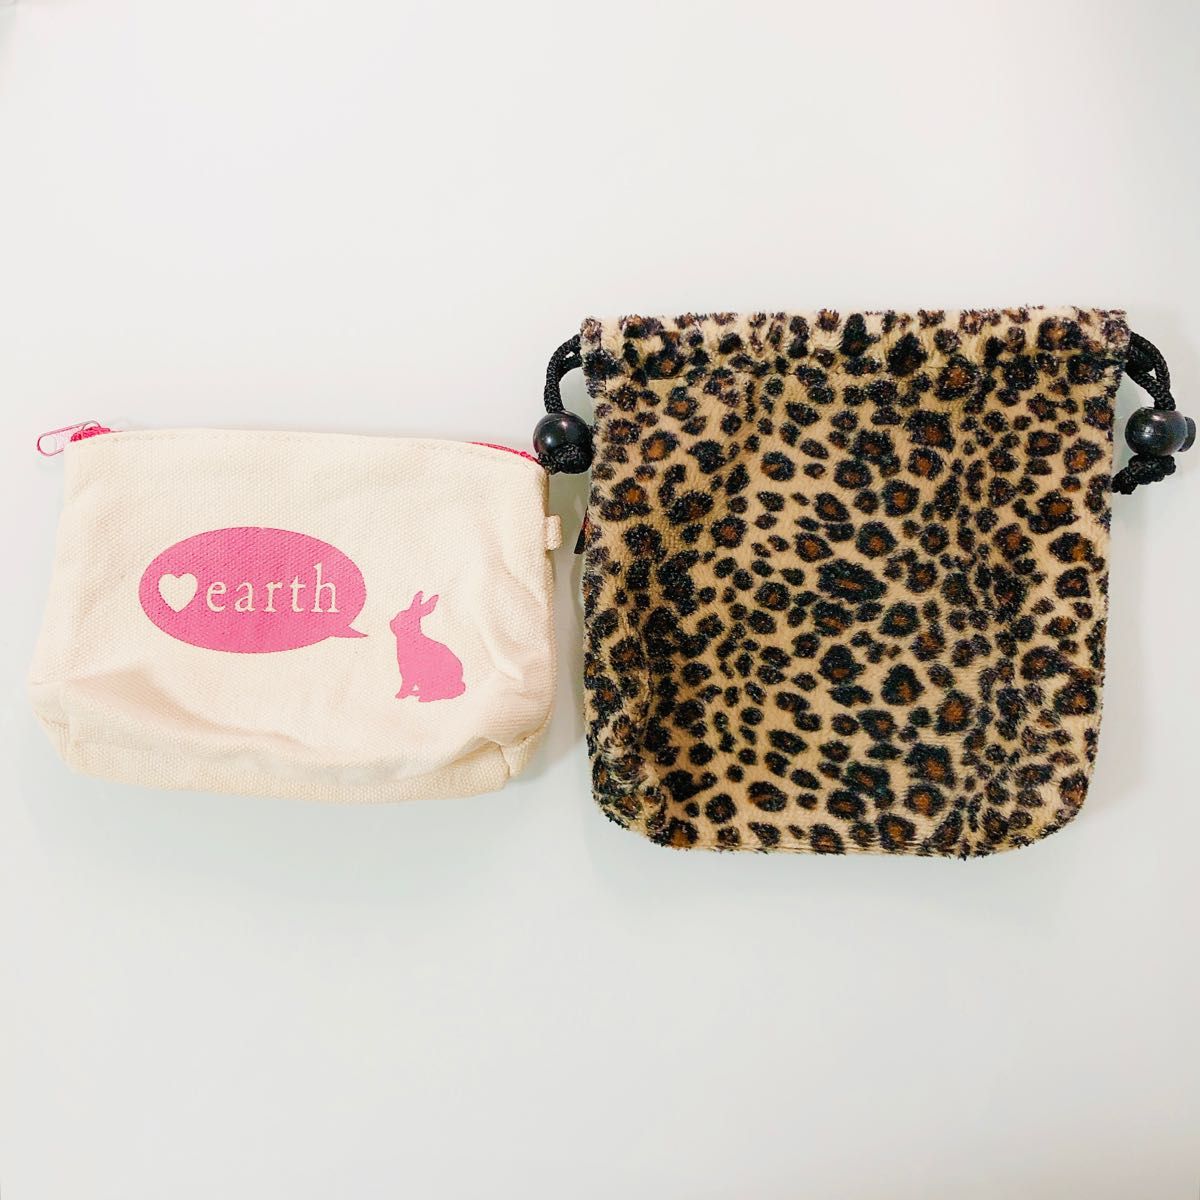 earth うさぎ ピンク PANTHER GIRL'S ヒョウ柄 ポーチ2点セット